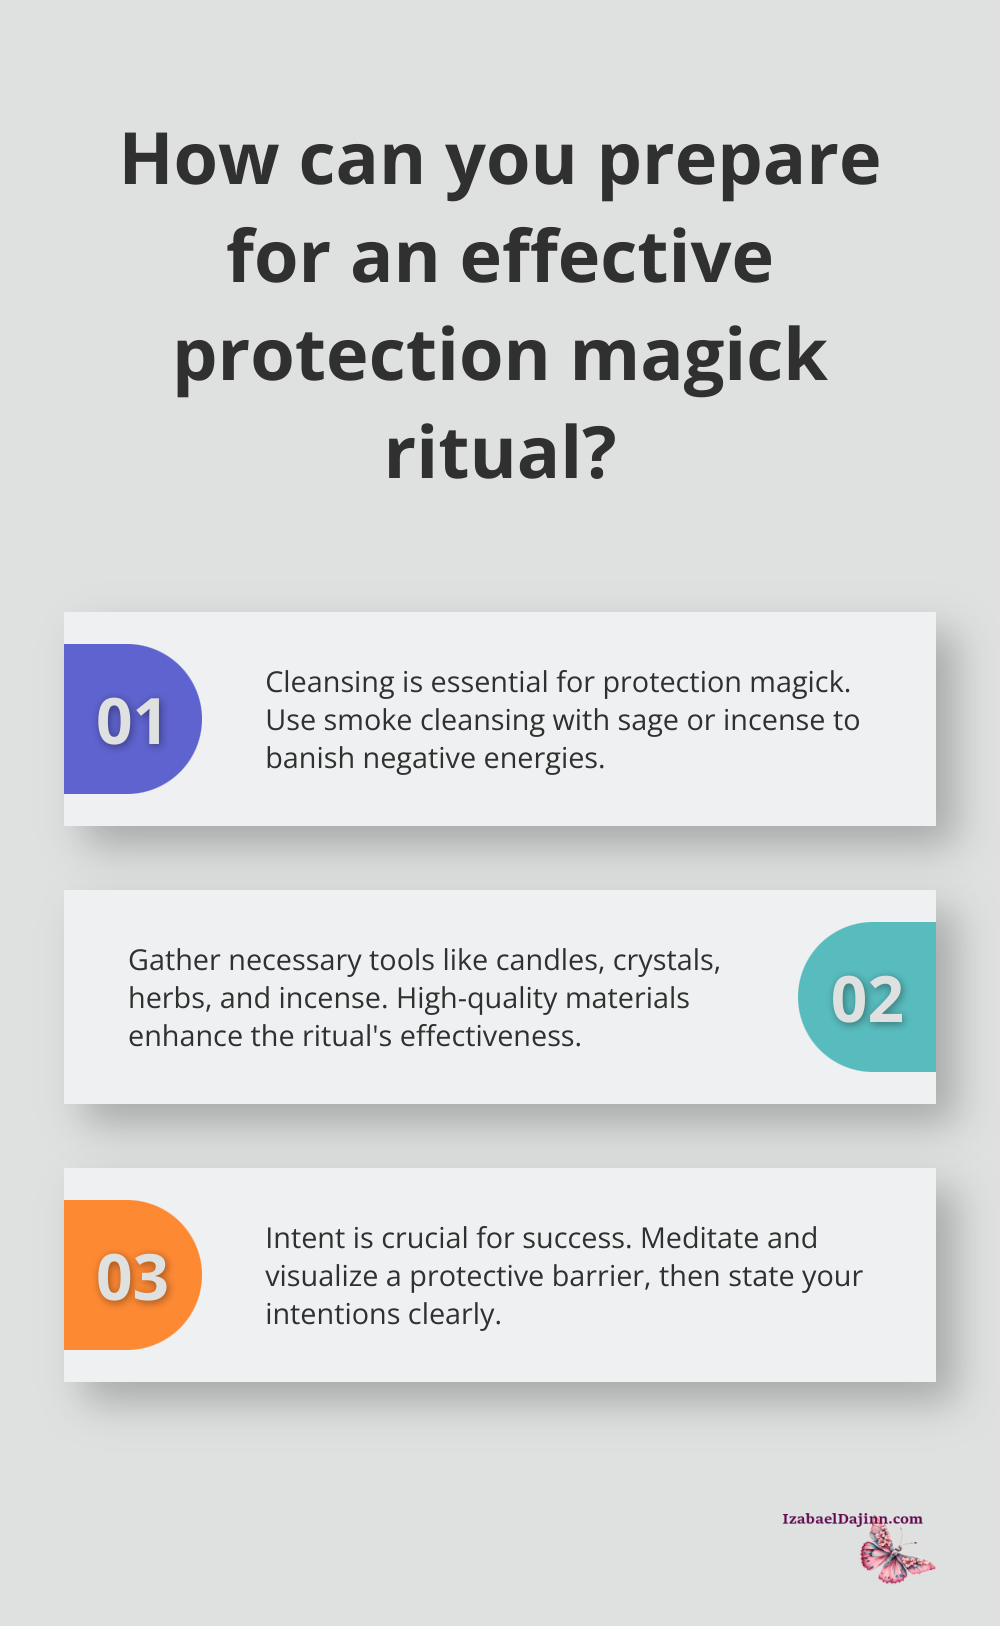 Fact - How can you prepare for an effective protection magick ritual?